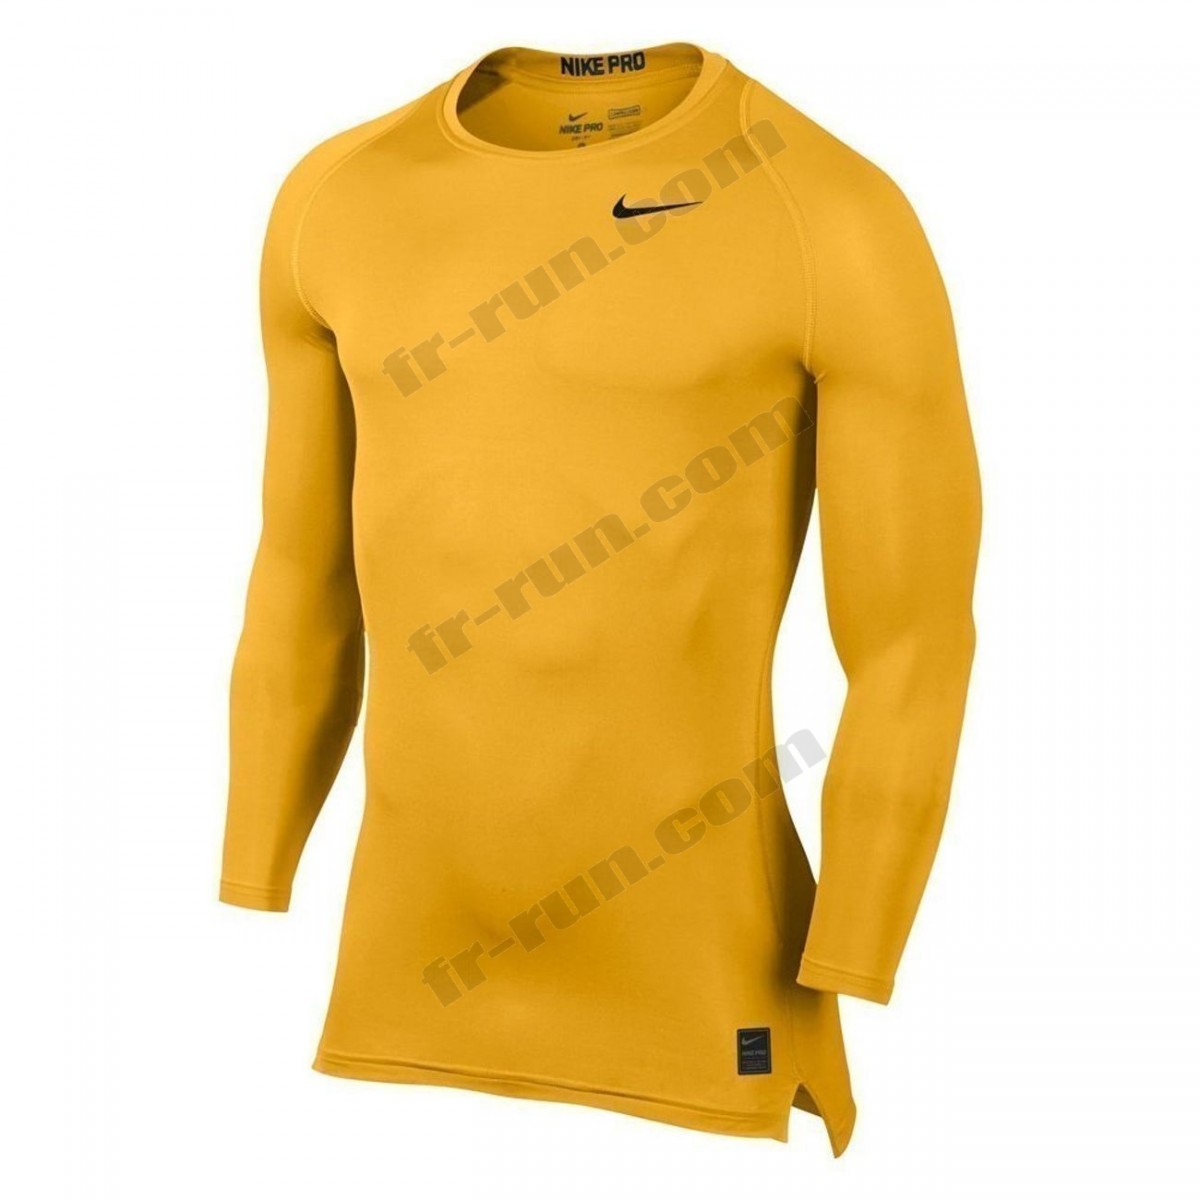 Nike/running homme NIKE Nike Pro Cool Compression ◇◇◇ Pas Cher Du Tout - -0